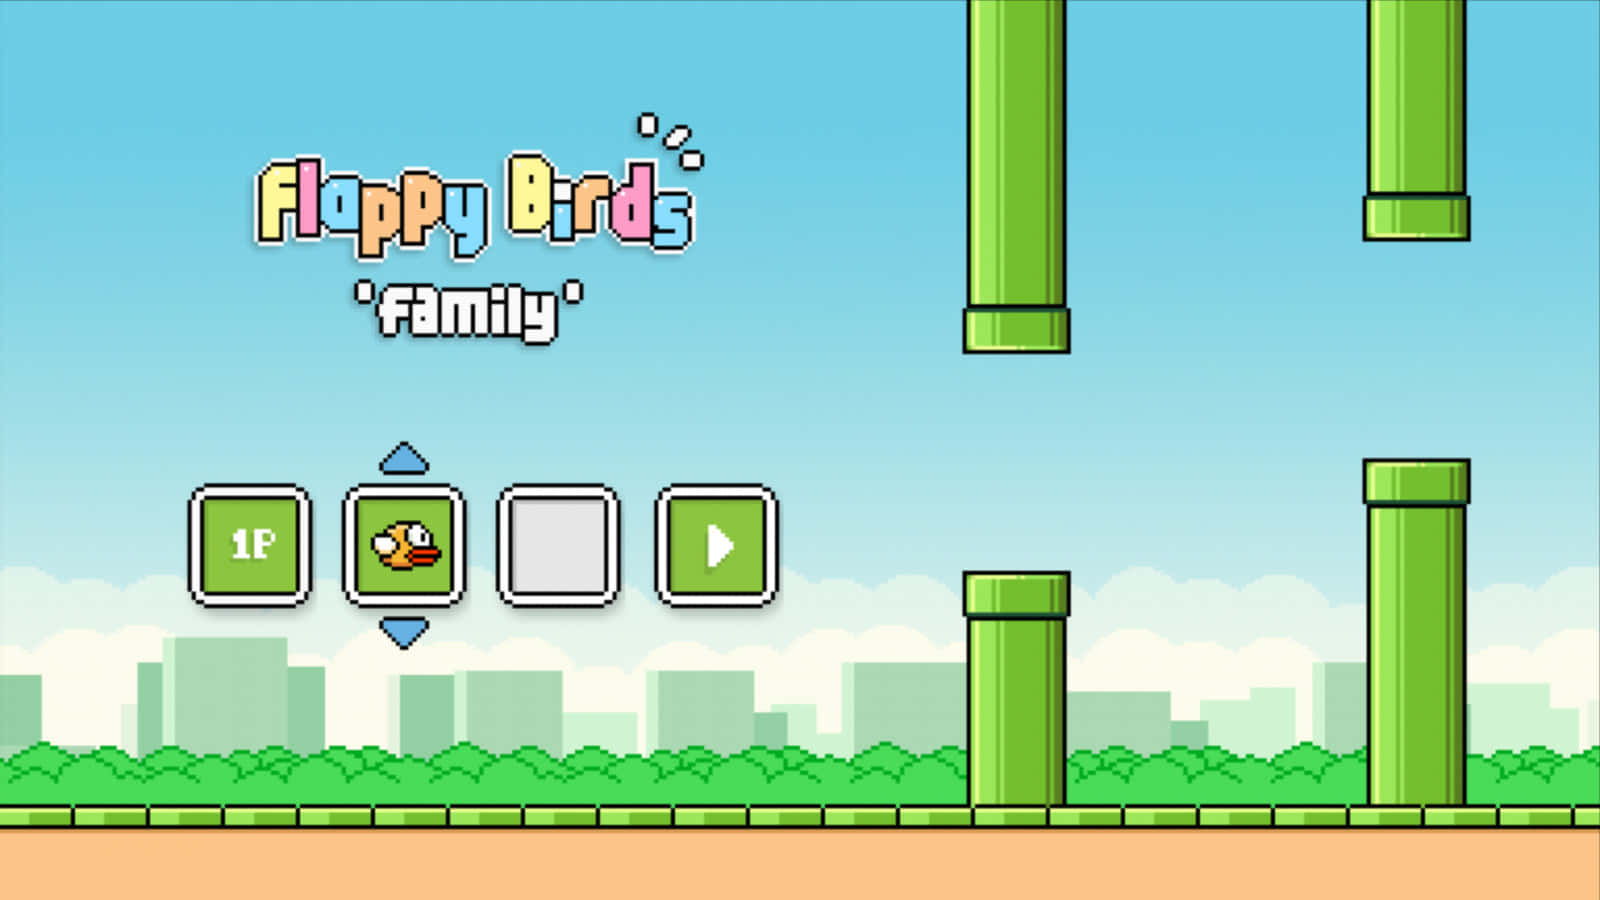 Image  Flappy Bird Video Game Flying Above a Colorful Scenery